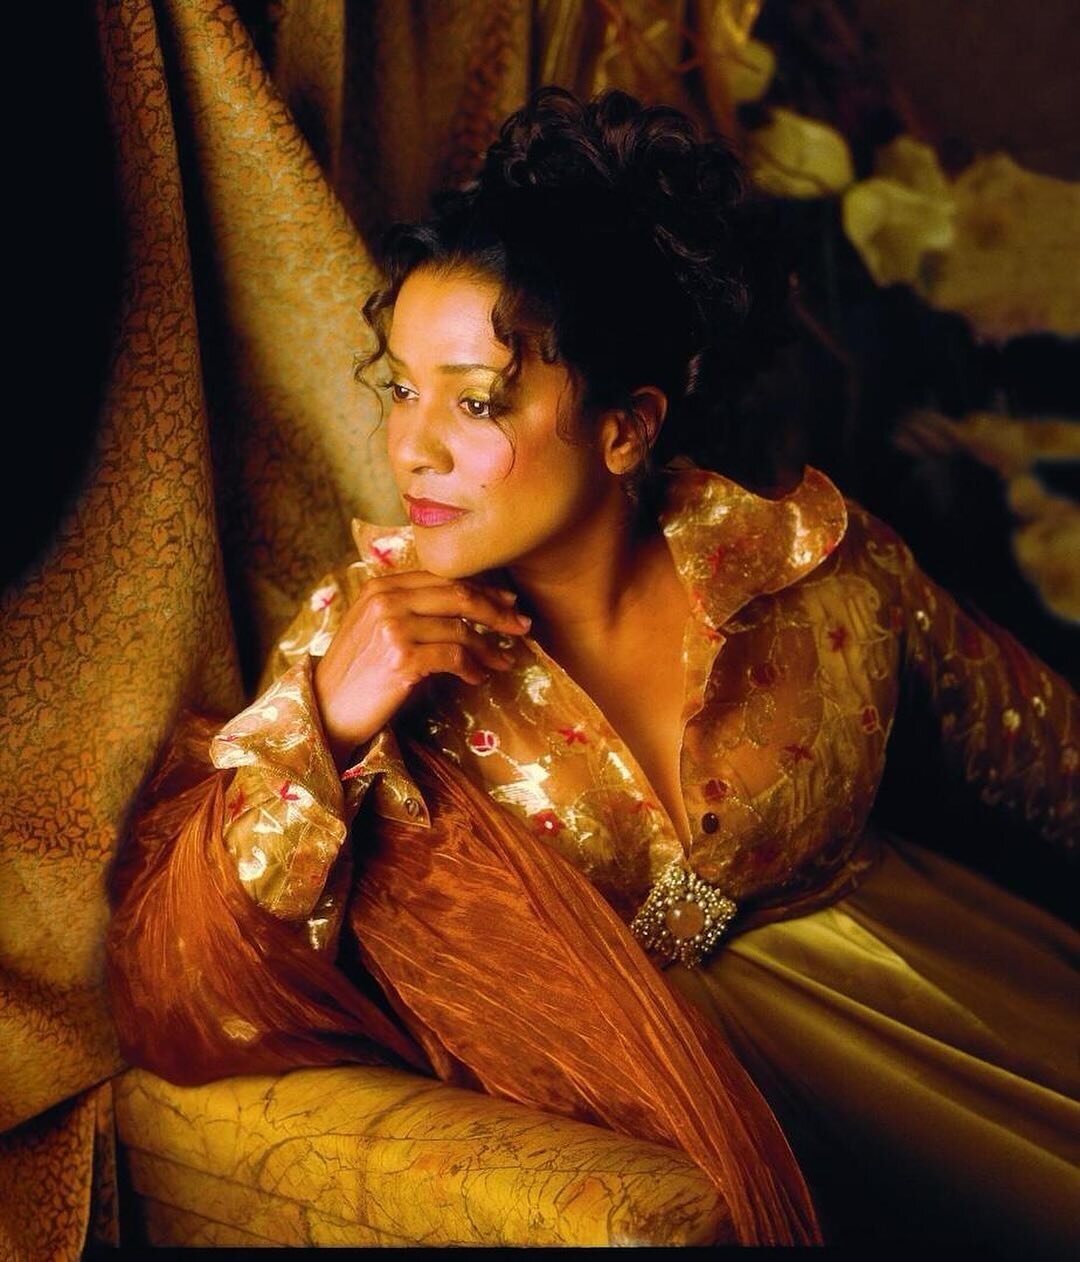 @MotionPictureEnterprises is excited to announce that The Queen is returning to the Met! Legendary soprano Kathleen Battle is officially gracing the stage with a recital later this season, featuring music by Purcell, Mendelssohn, Villa-Lobos, and mor